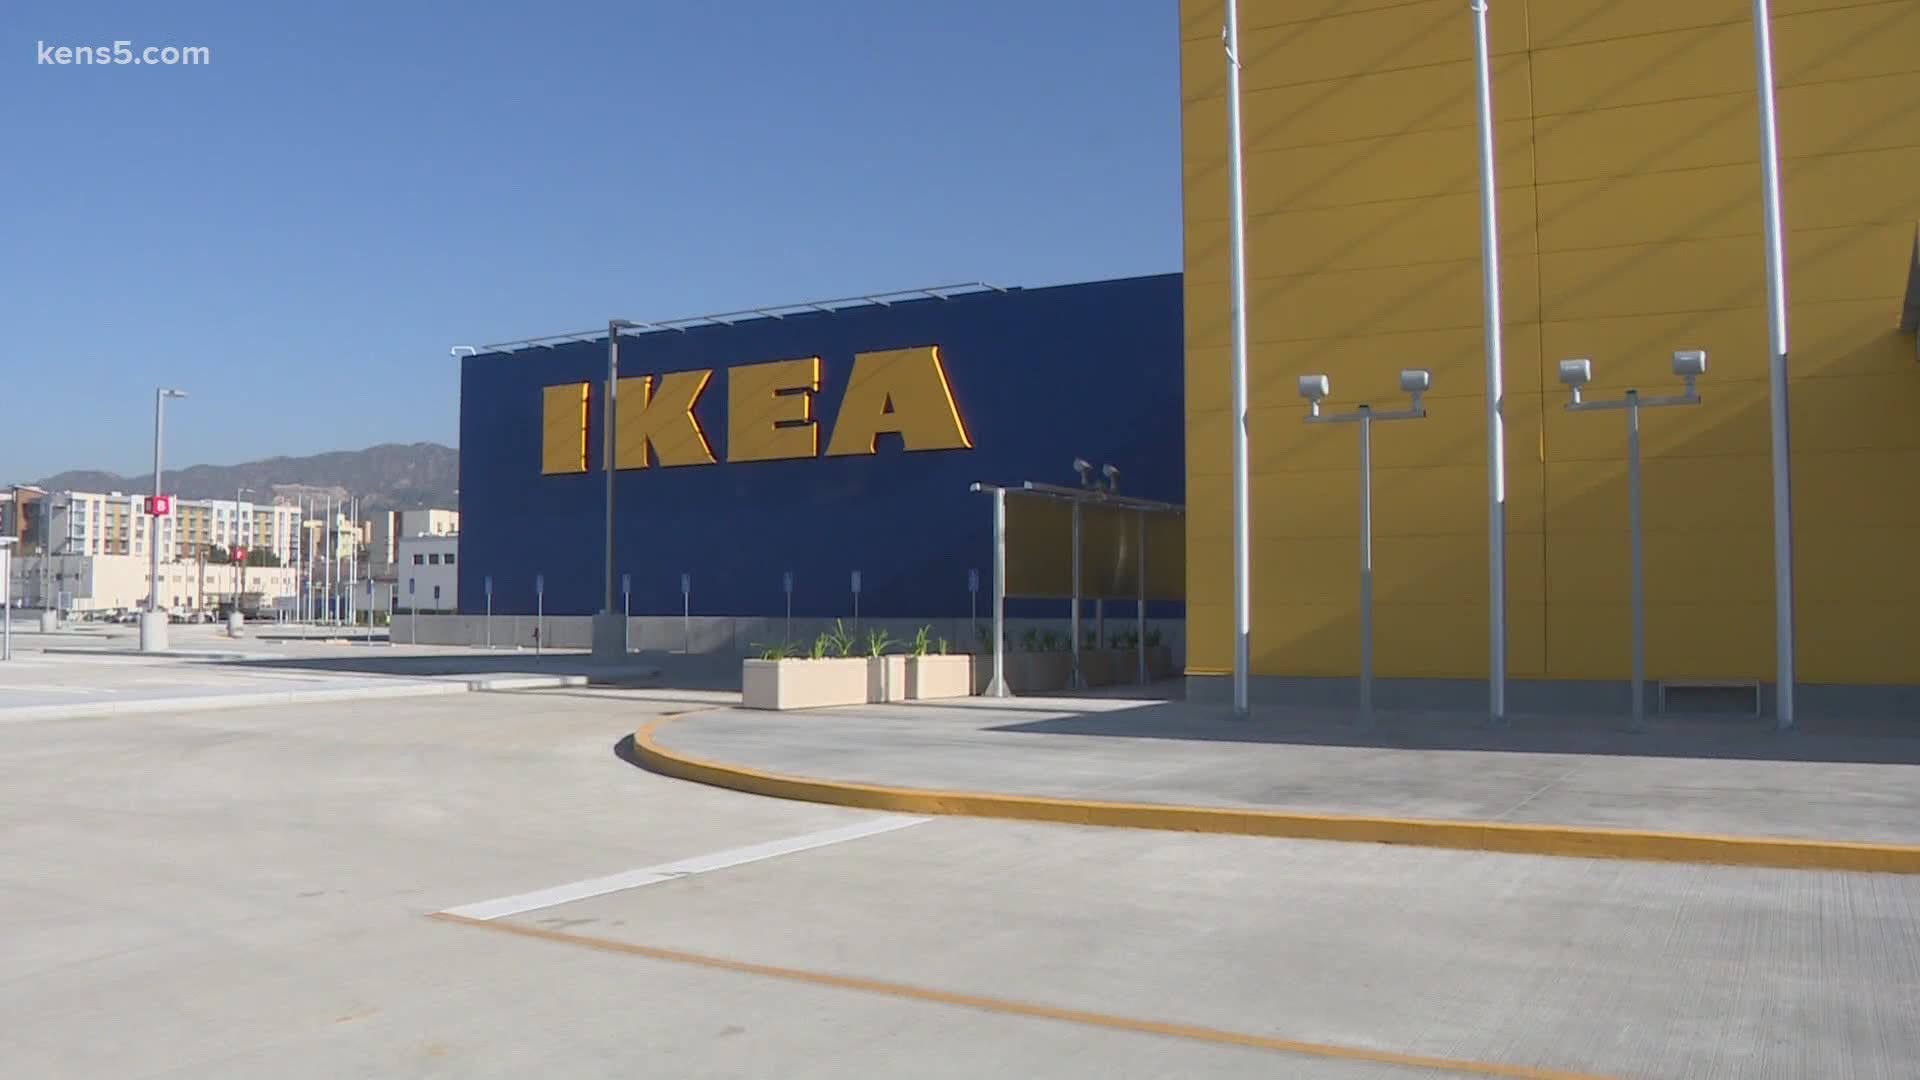 IKEA closed for in-store shopping in March. But it has reopened its doors to the public in Live Oak.